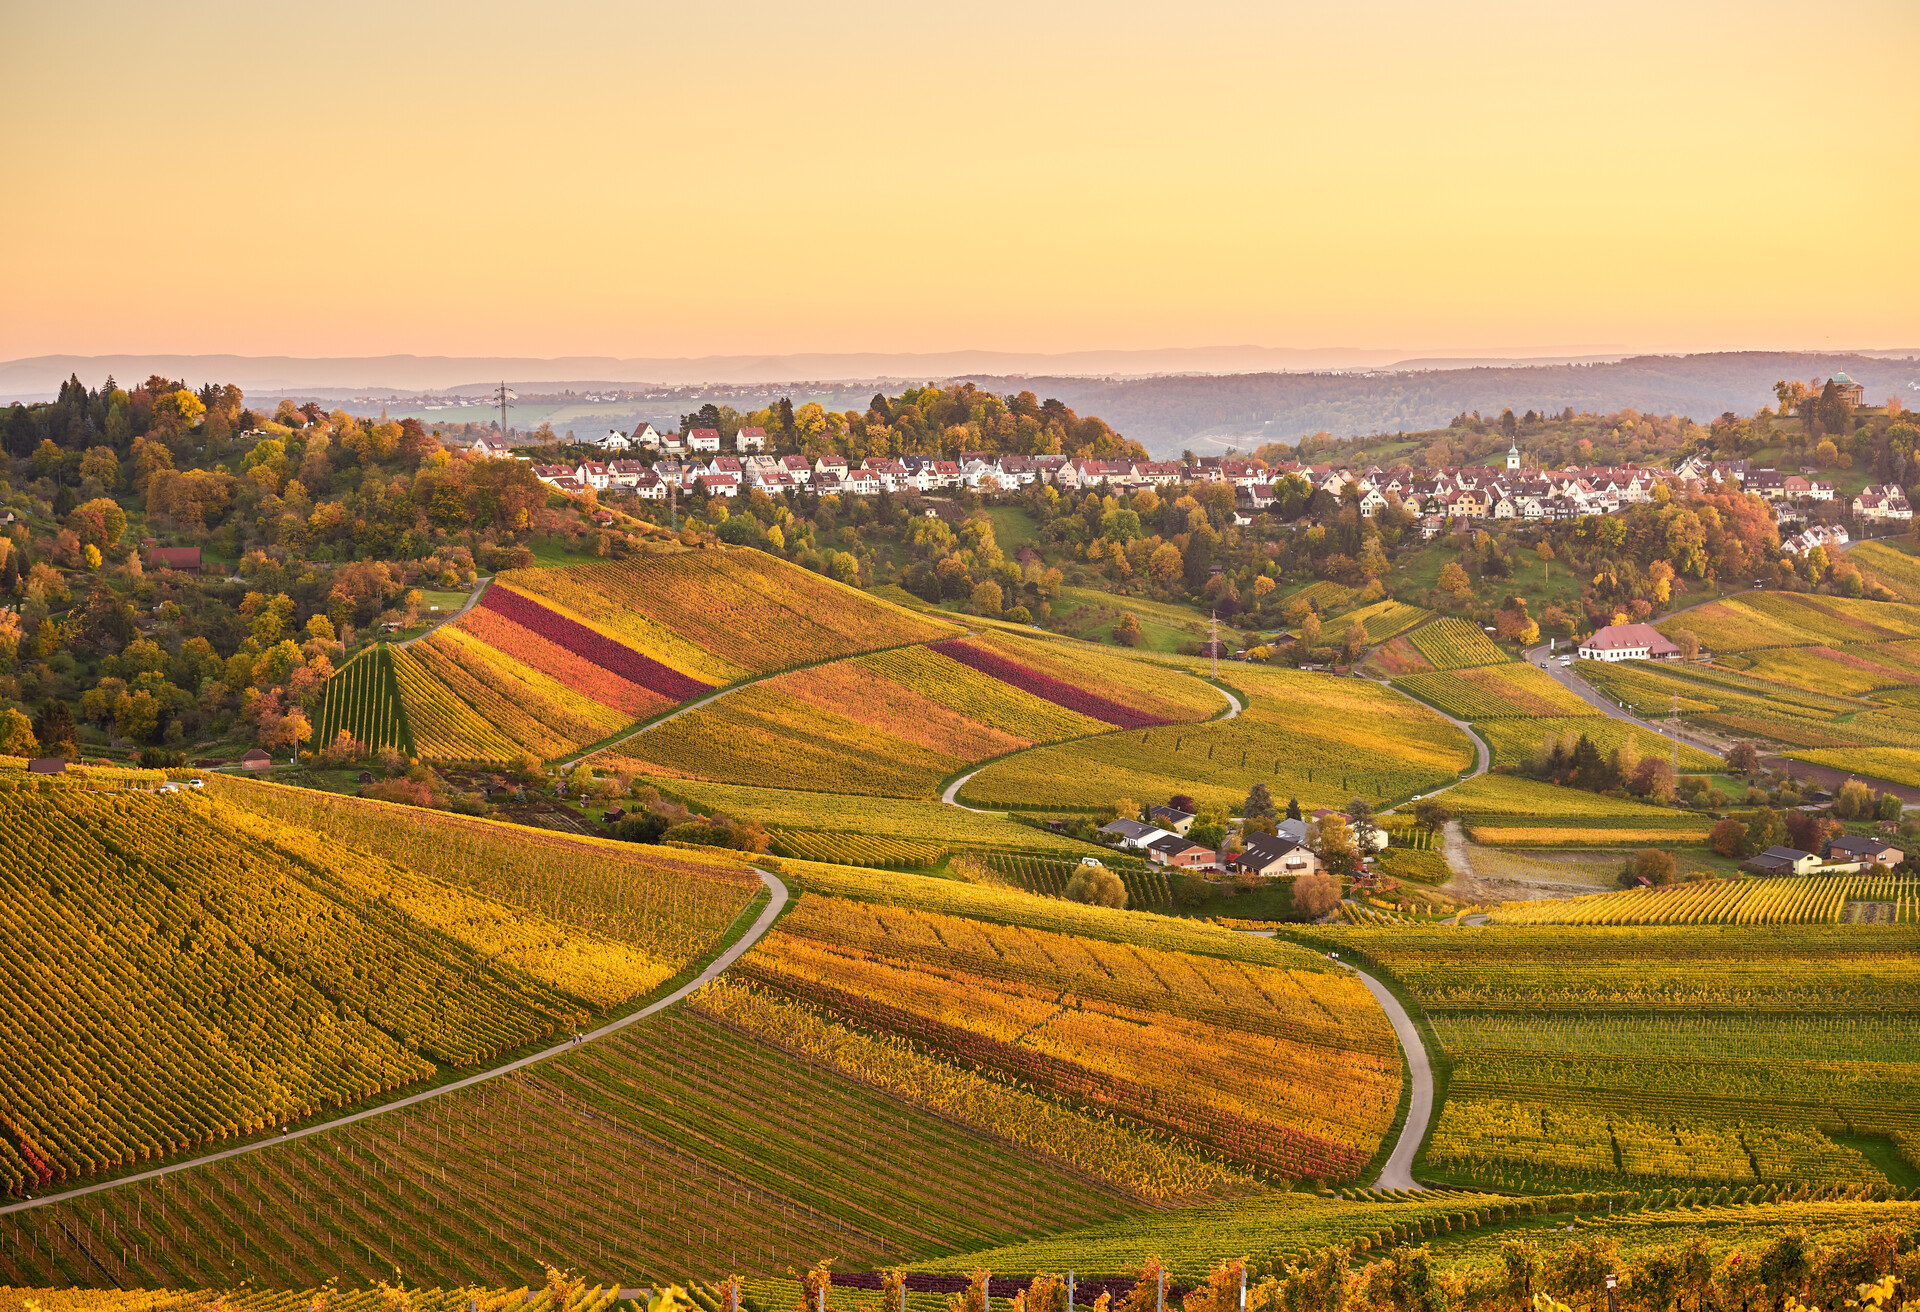 Vineyards in Stuttgart - colorful wine growing region in the south of Germany with view over Neckar Valley; Shutterstock ID 760958869; Purpose: Destiny; Brand (KAYAK, Momondo, Any): Any